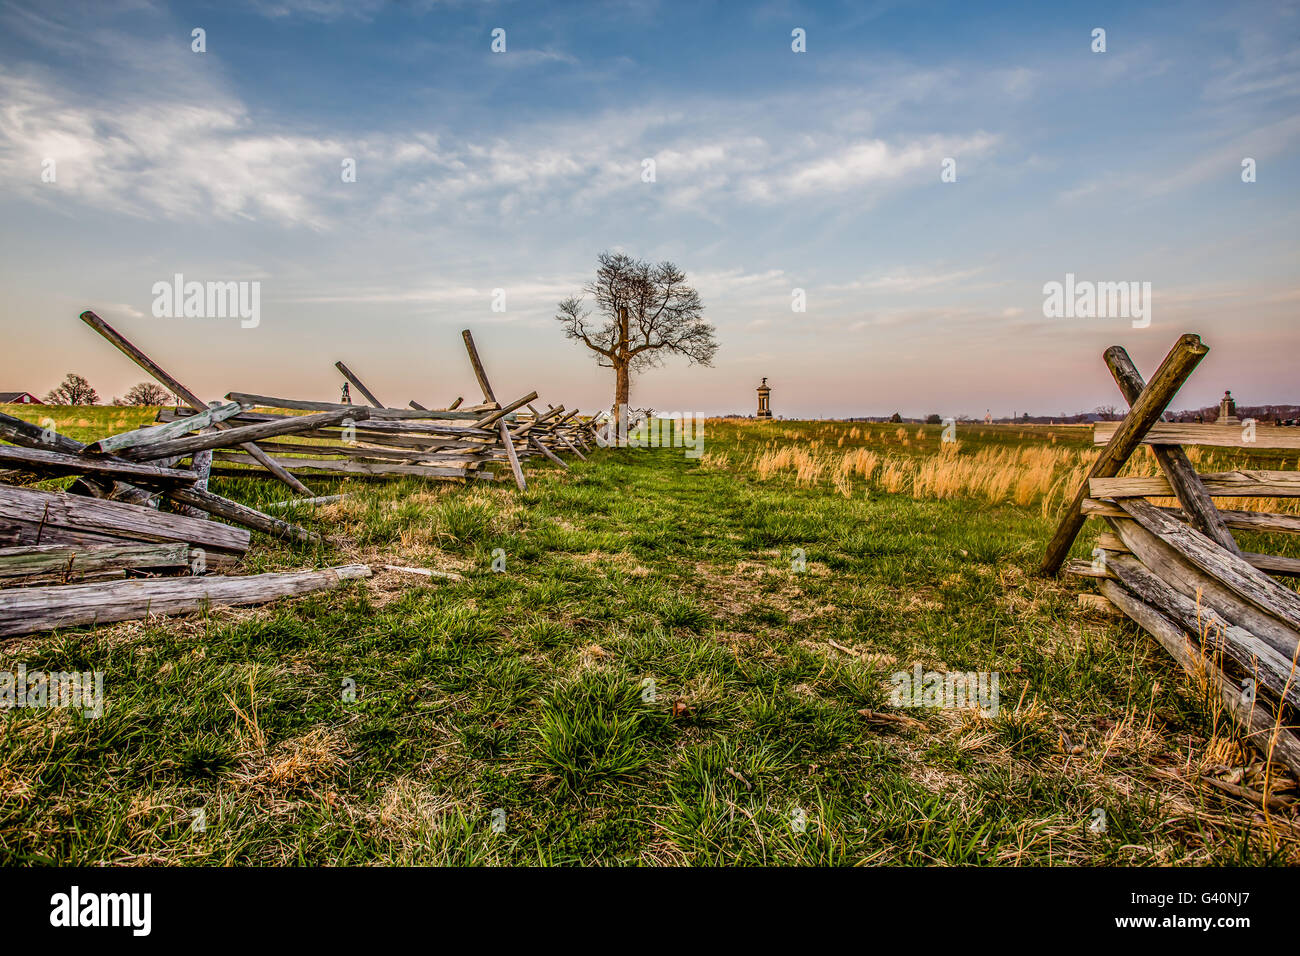 Out and about on this old historic battlefield. Stock Photo